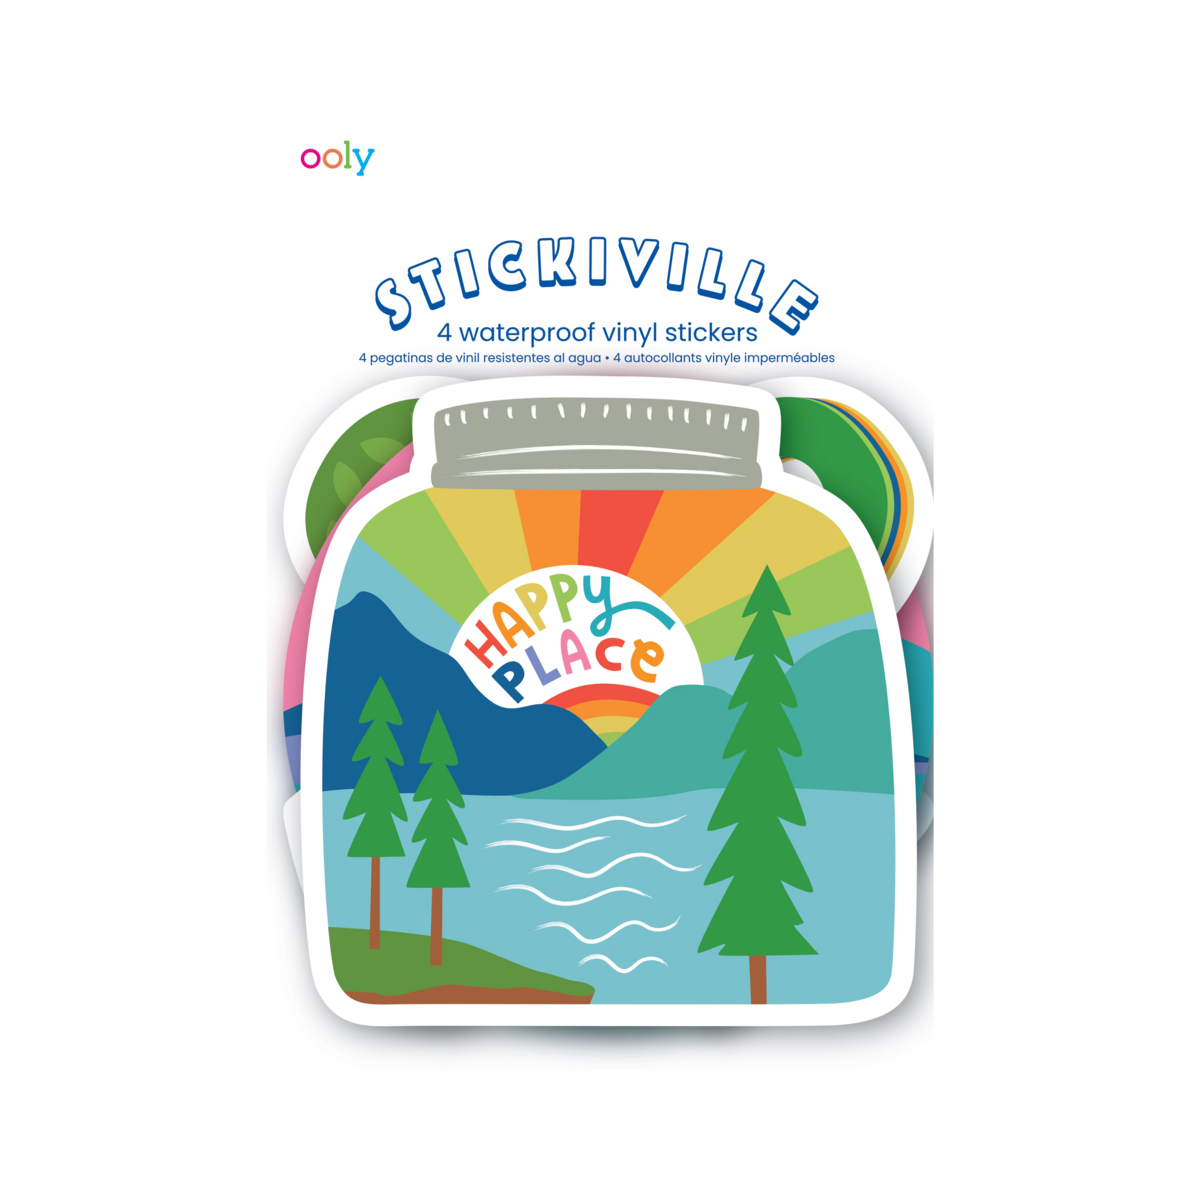 Stickiville Wild Outdoors Vinyl stickers in packaging